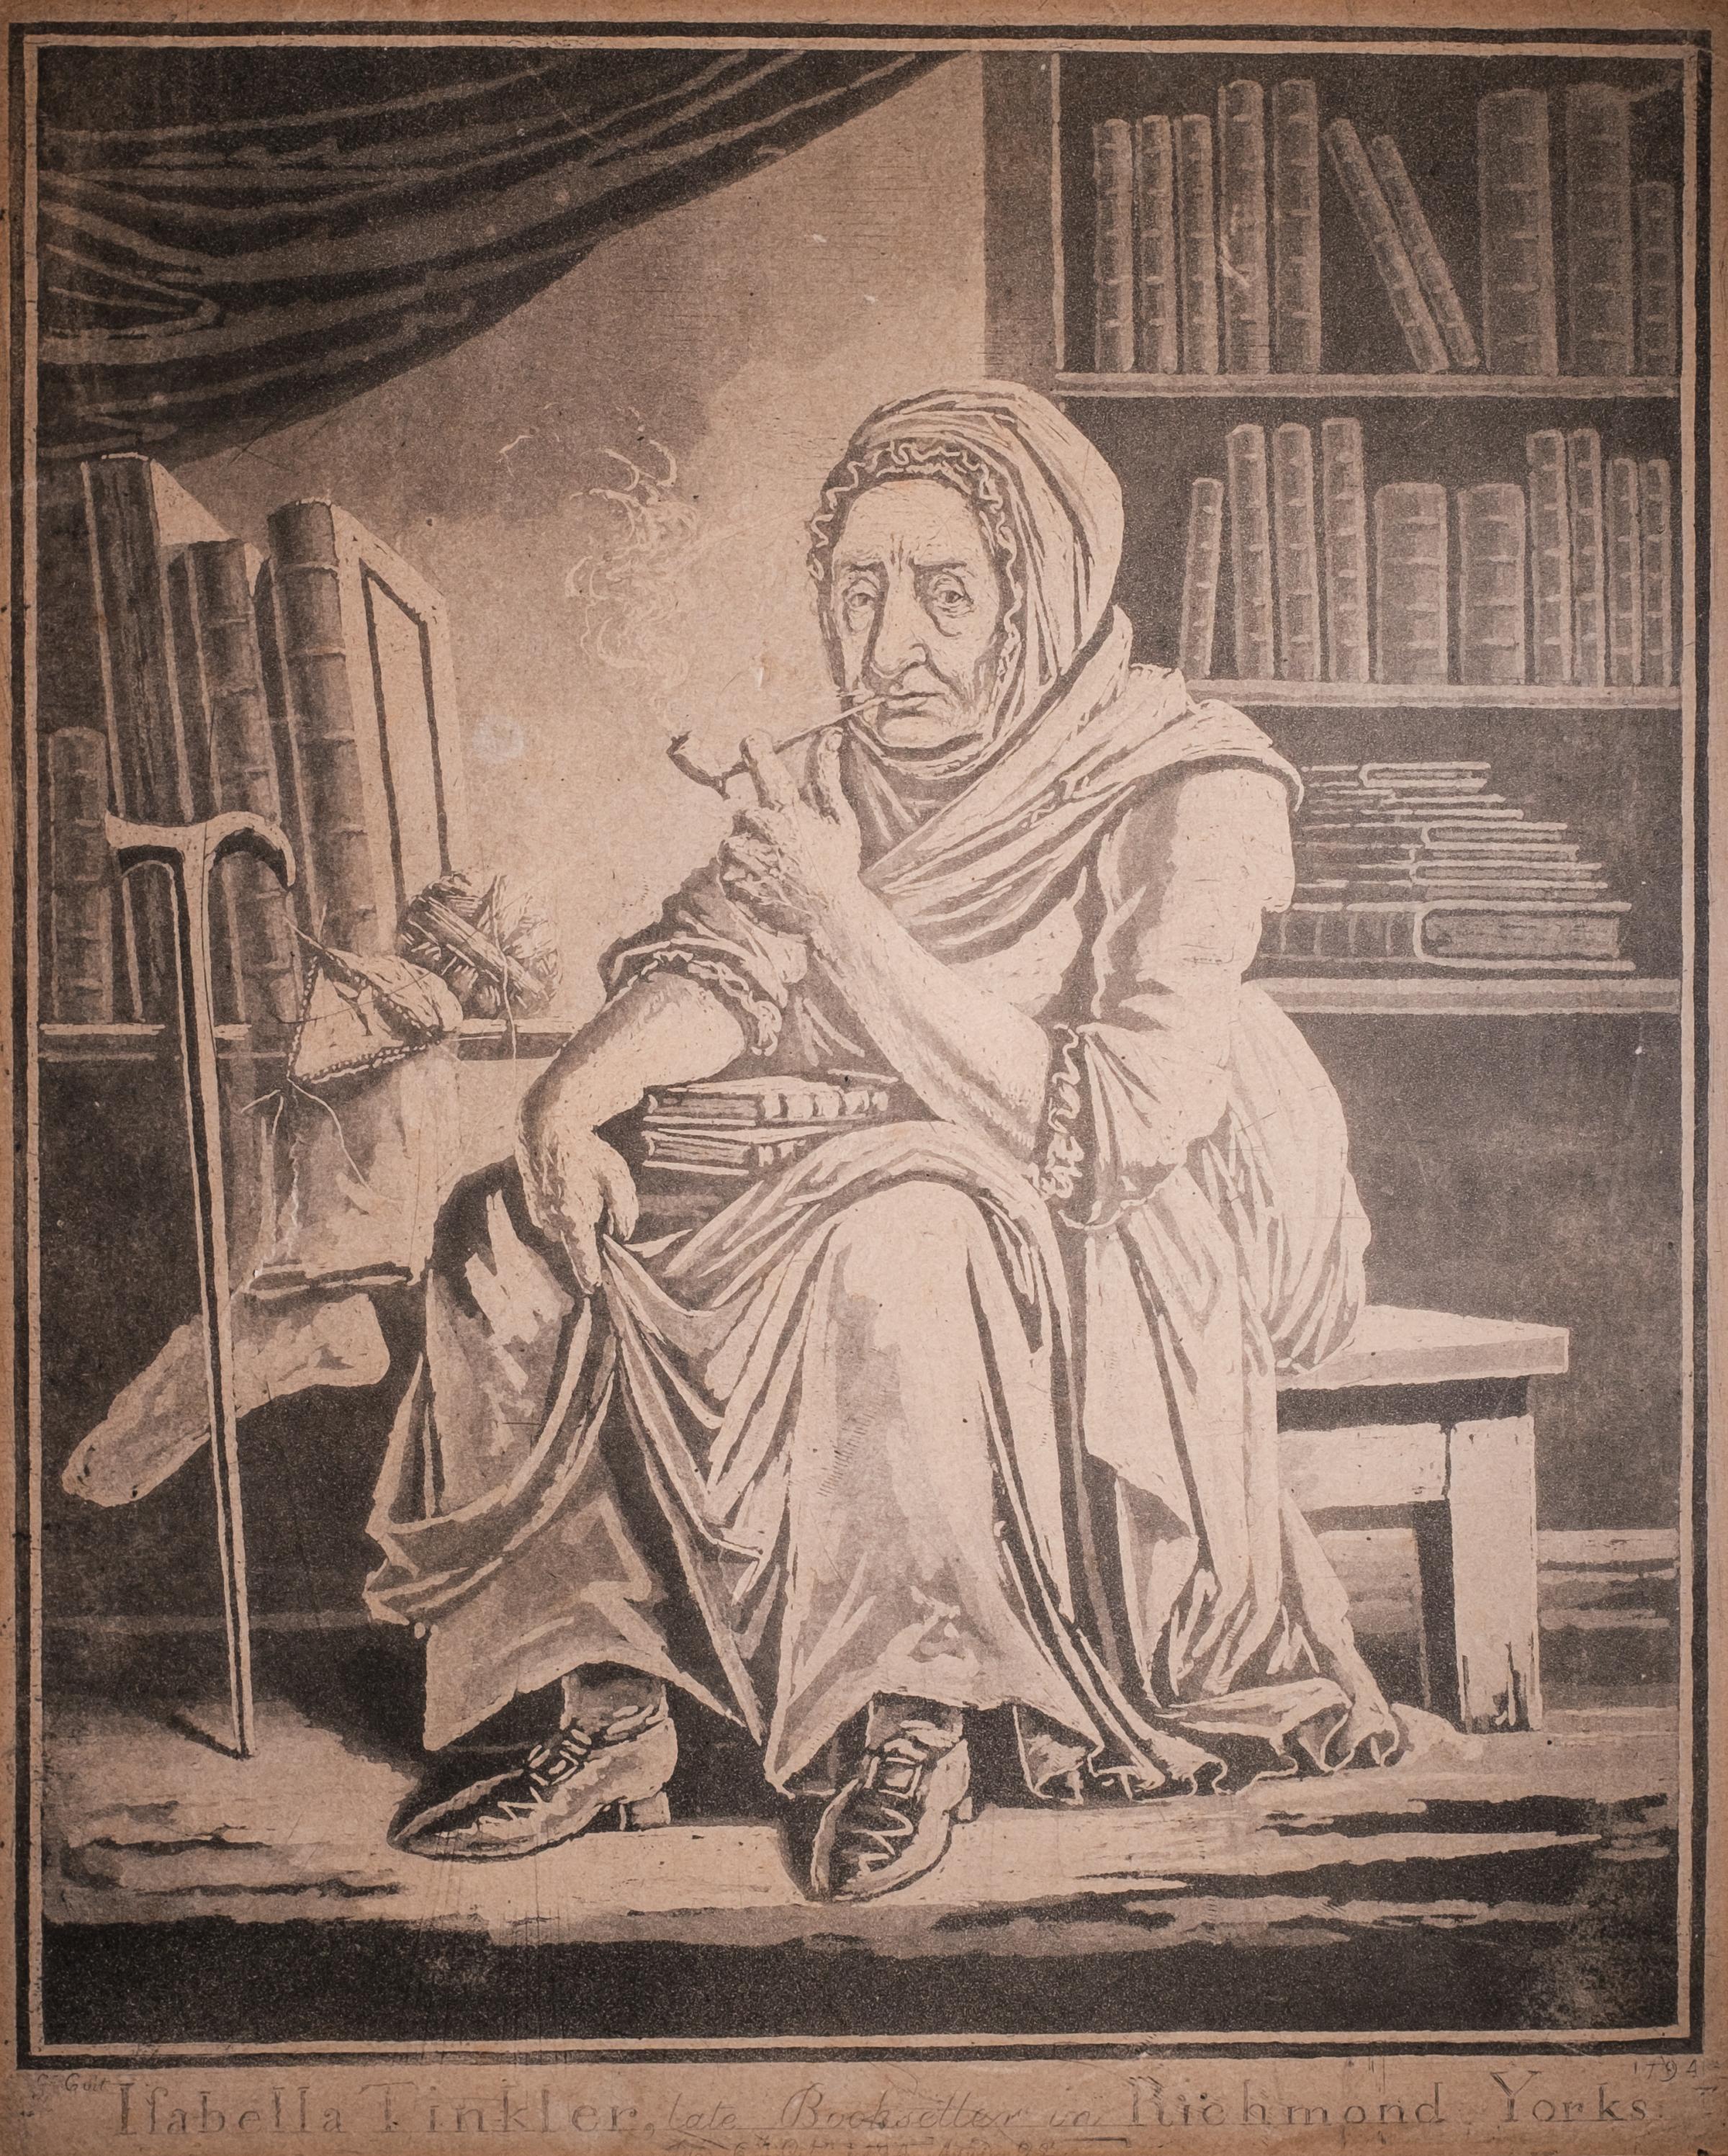 Isabella Tinkler, the Richmond bookseller, as drawn by James Cuit, the Richard artist